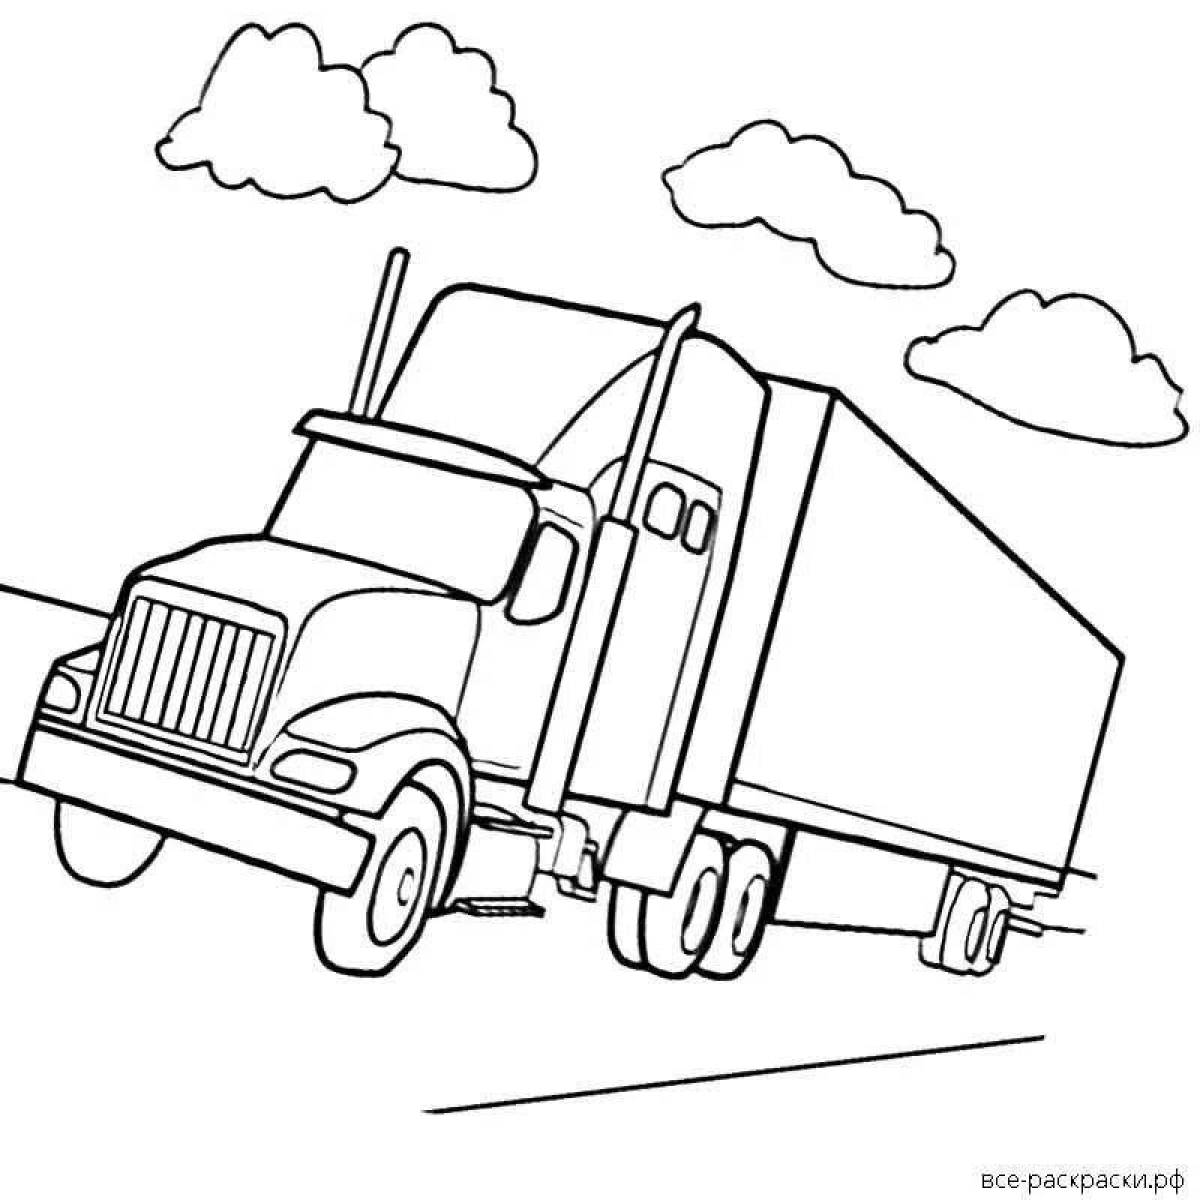 Coloring page incredible trailer truck